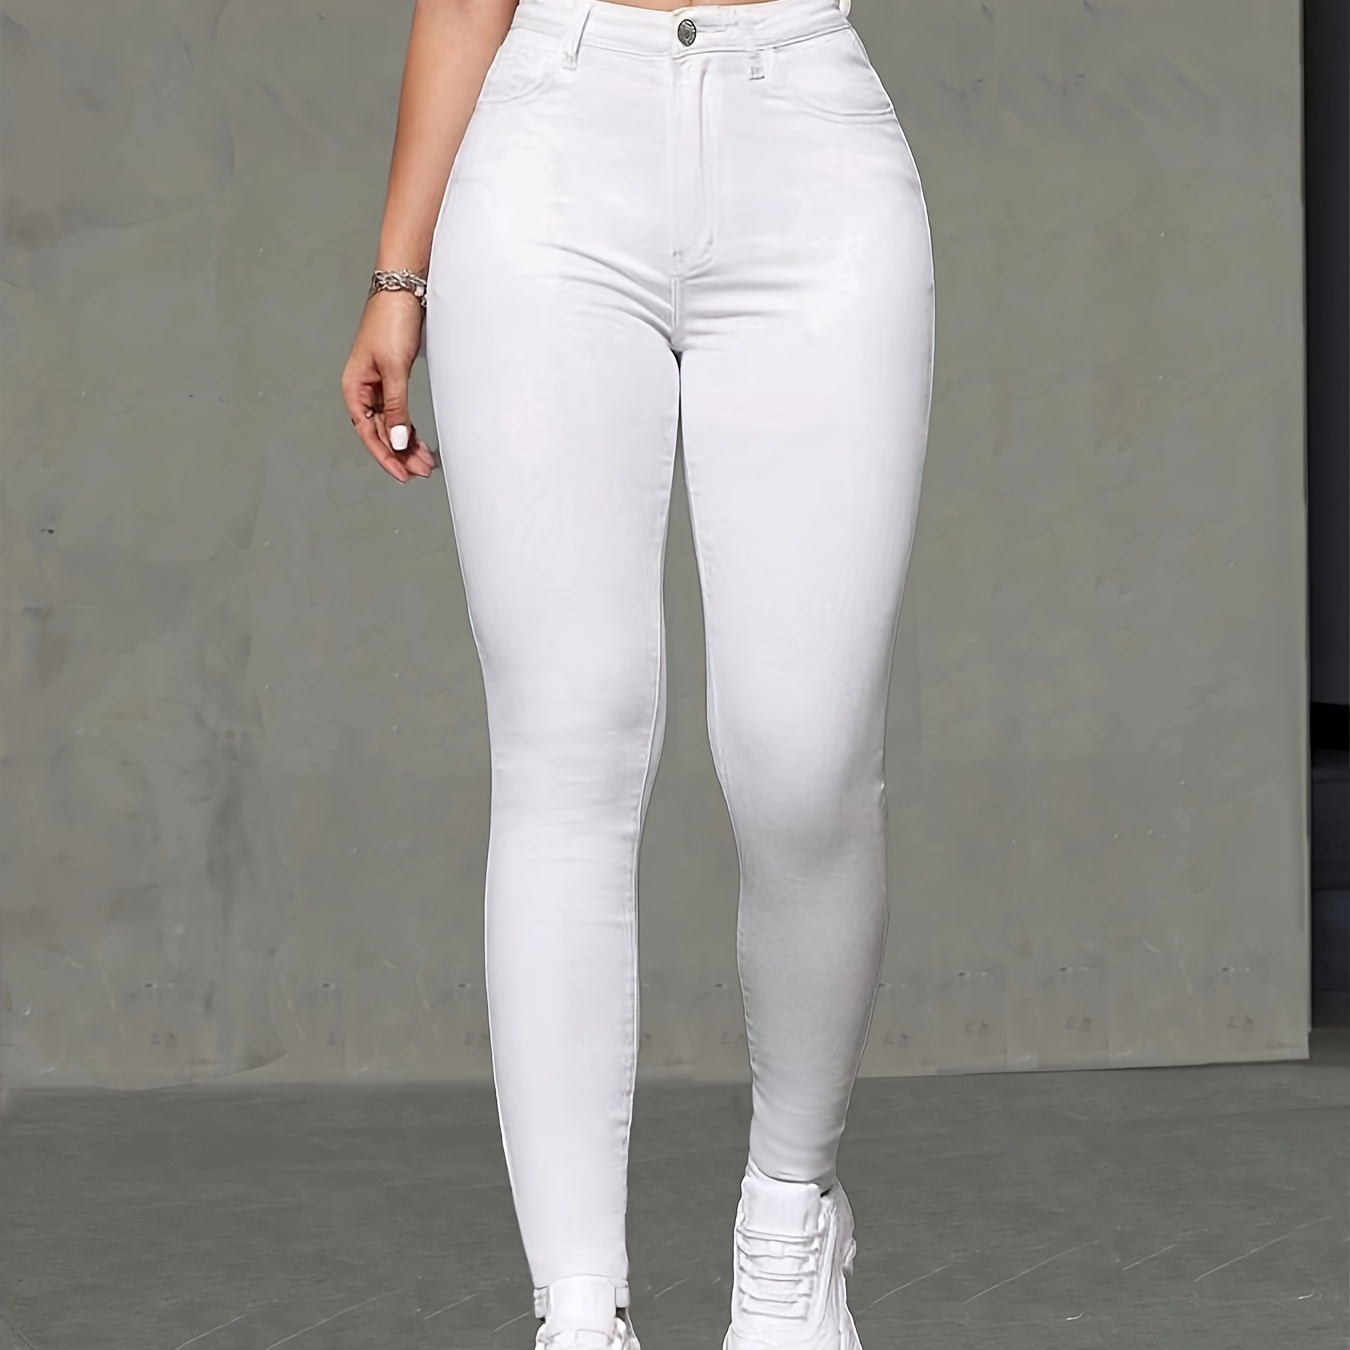 

Women's Elegant Plain White Stretchy Skinny Fit Skinny Jeans, Casual Denim Pants For Daily Wear